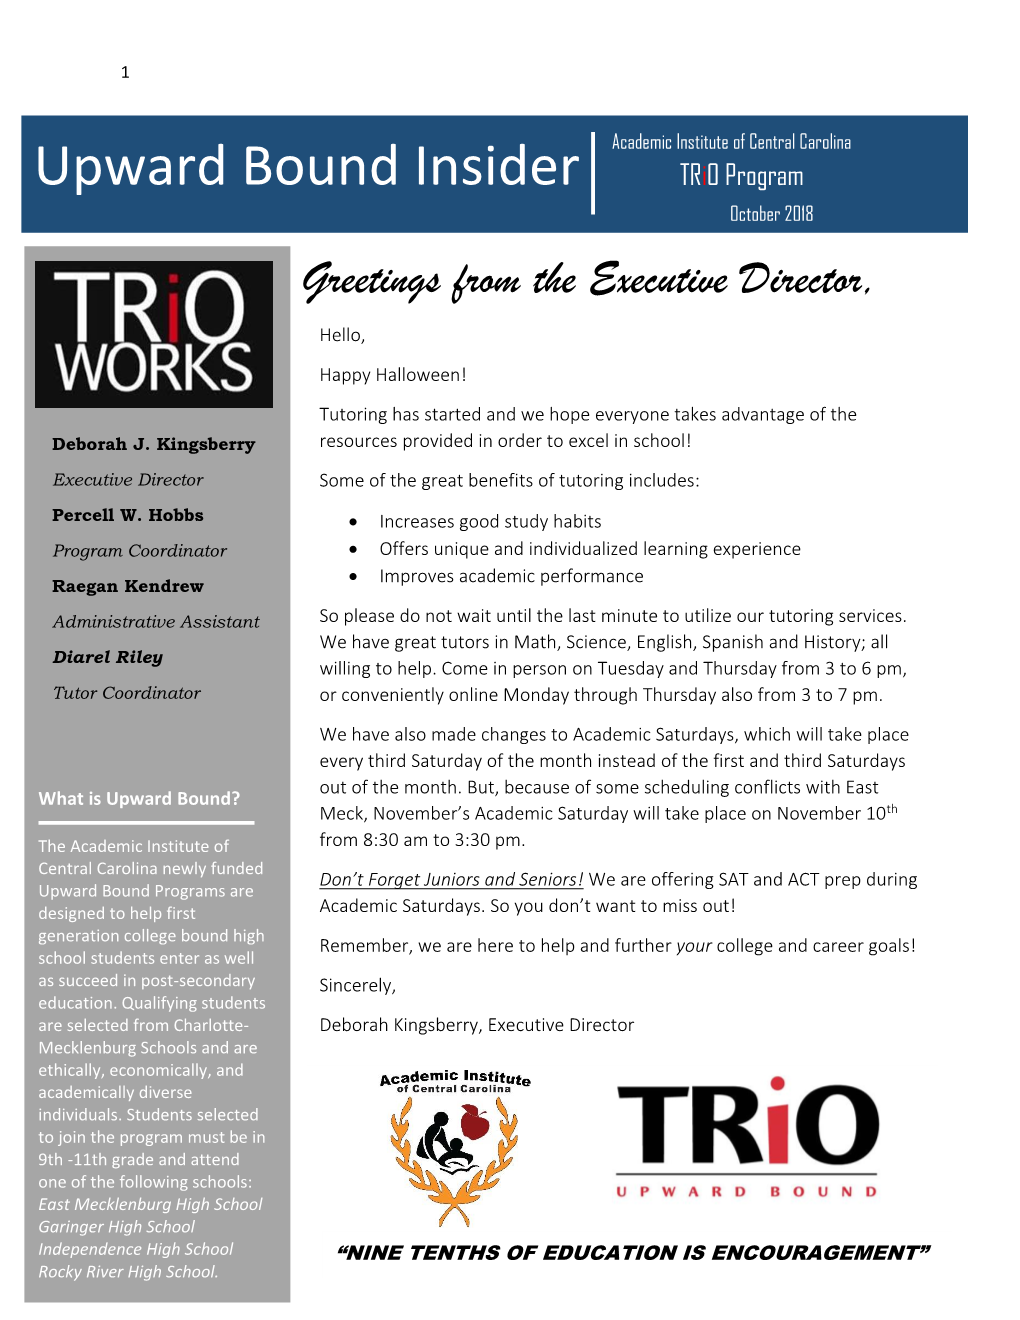 Upward Bound Insider Trio Program October 2018 Greetings from the Executive Director